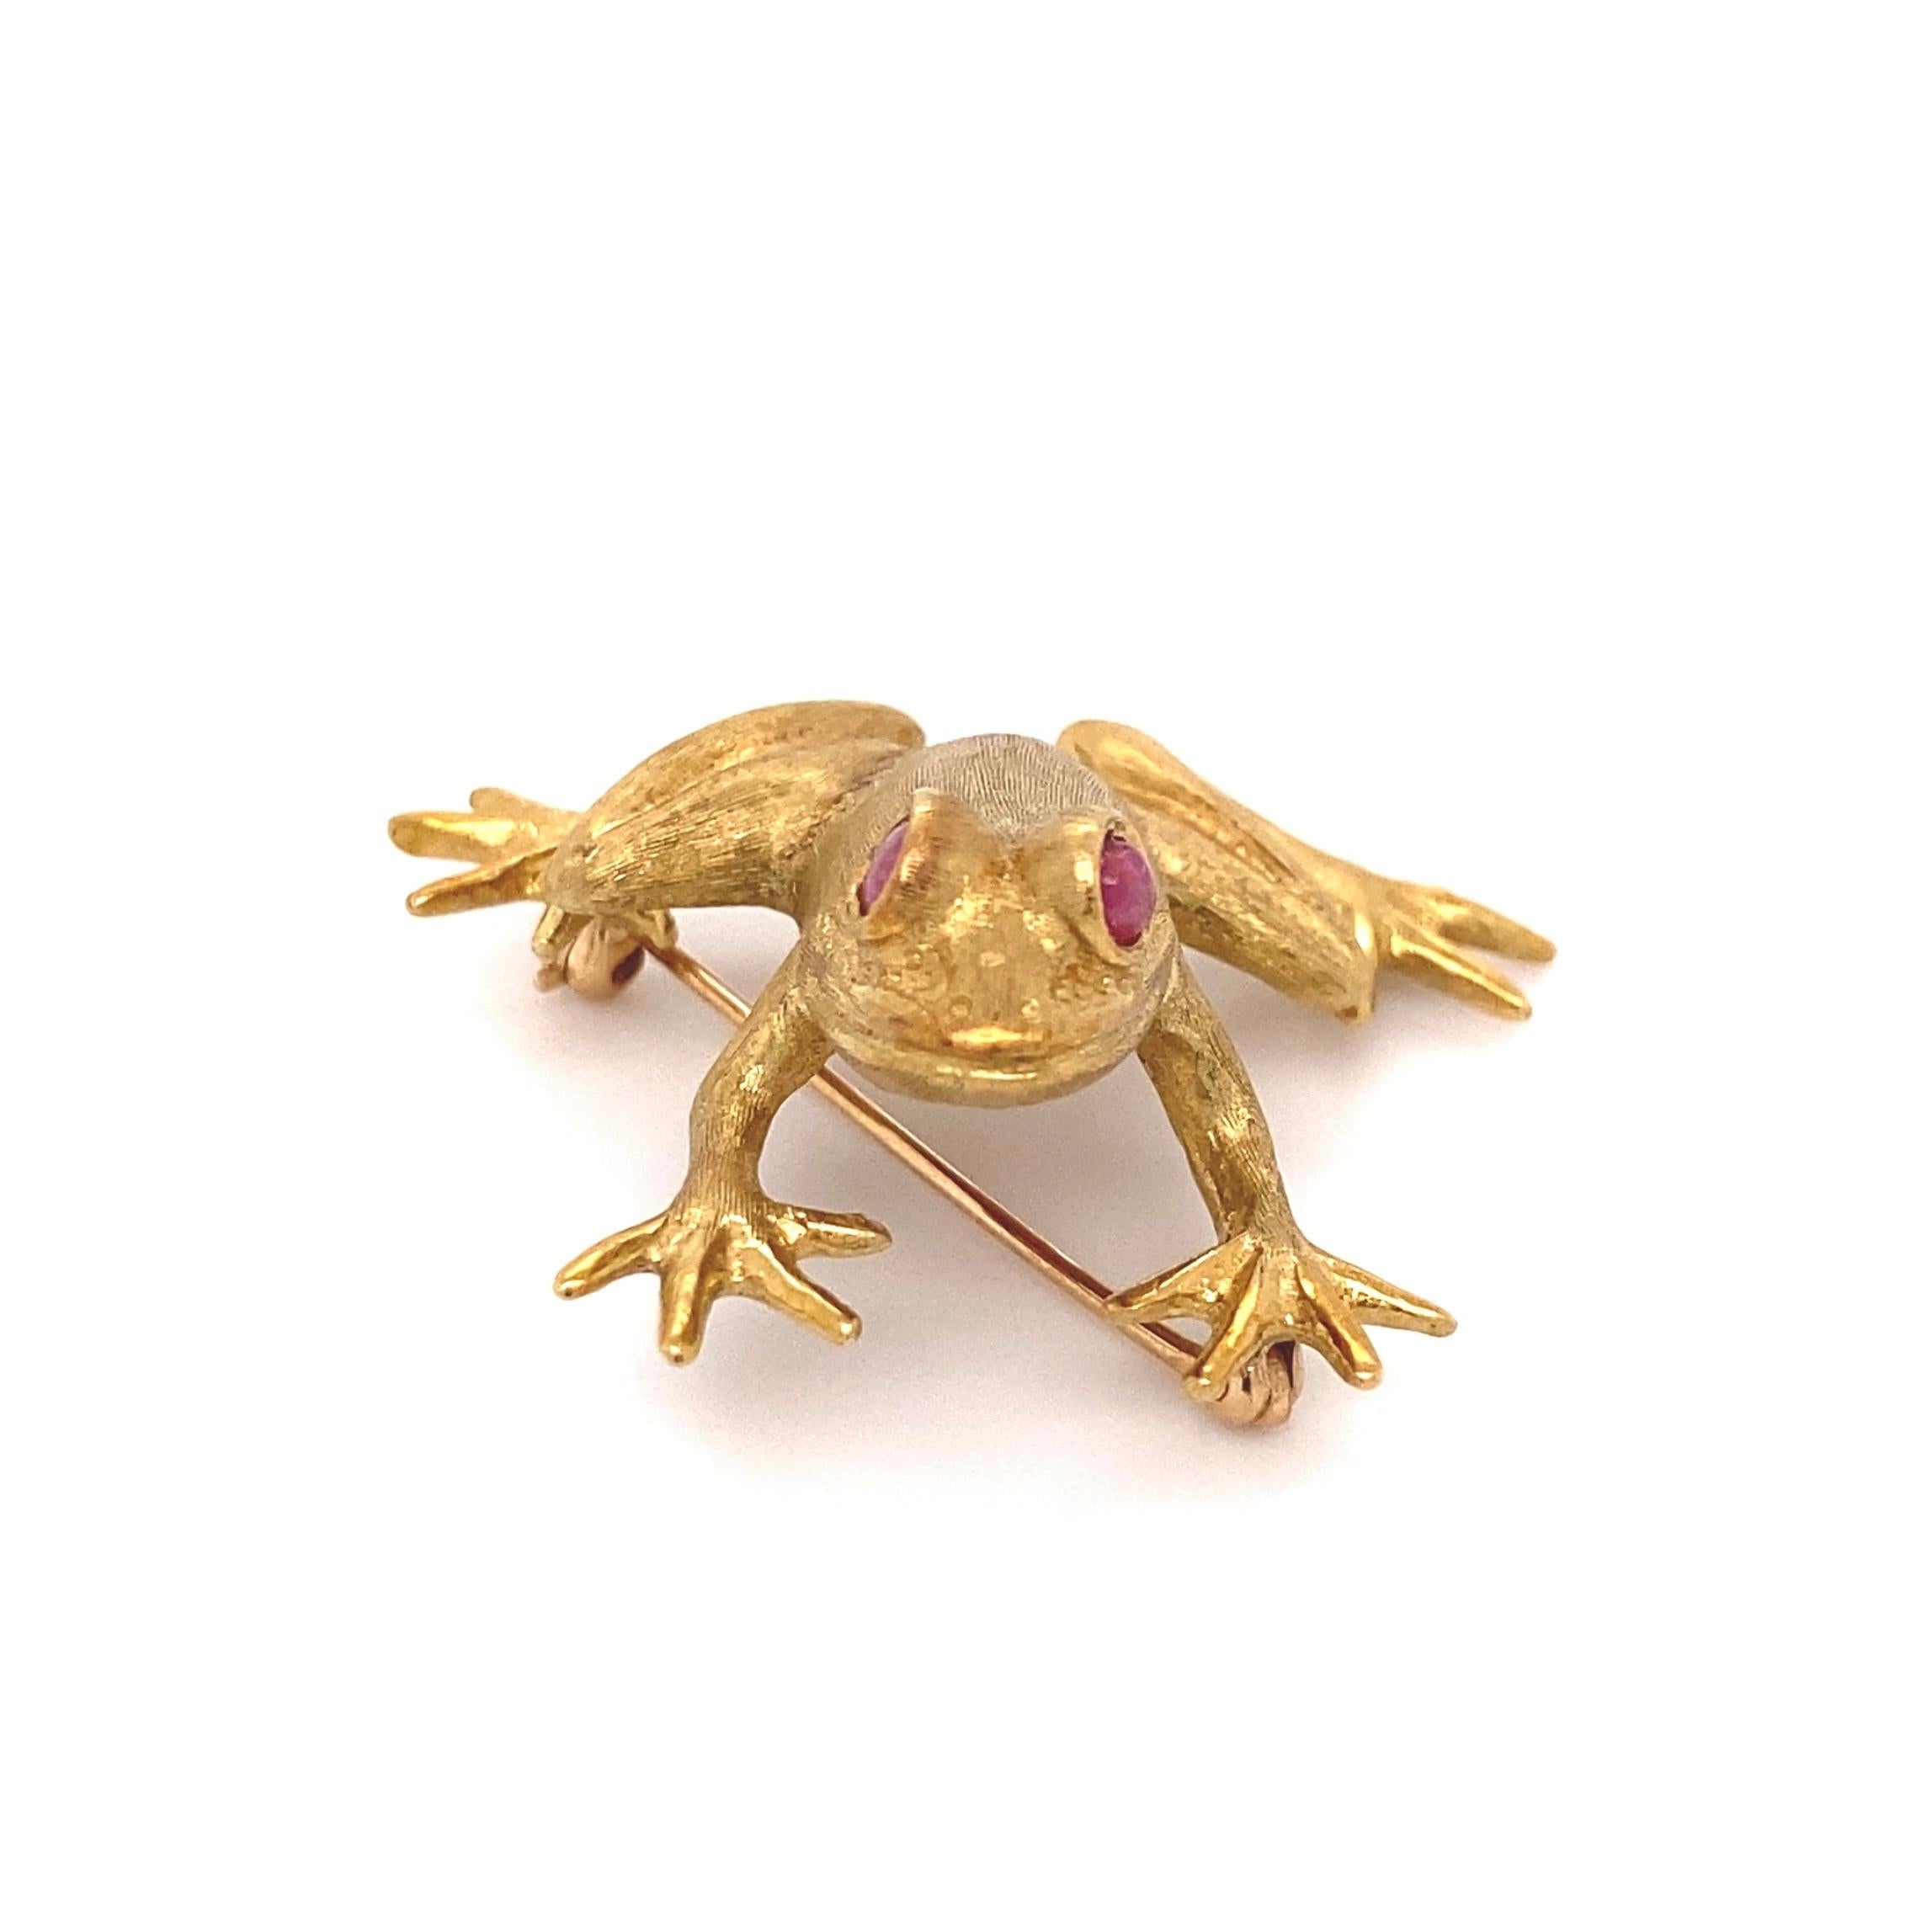 Simply Beautiful! Finely detailed Designer Signed Awesome Frog with Ruby Eyes Brooch. Hand crafted in 18 Karat Yellow Gold. Signed and marked: 